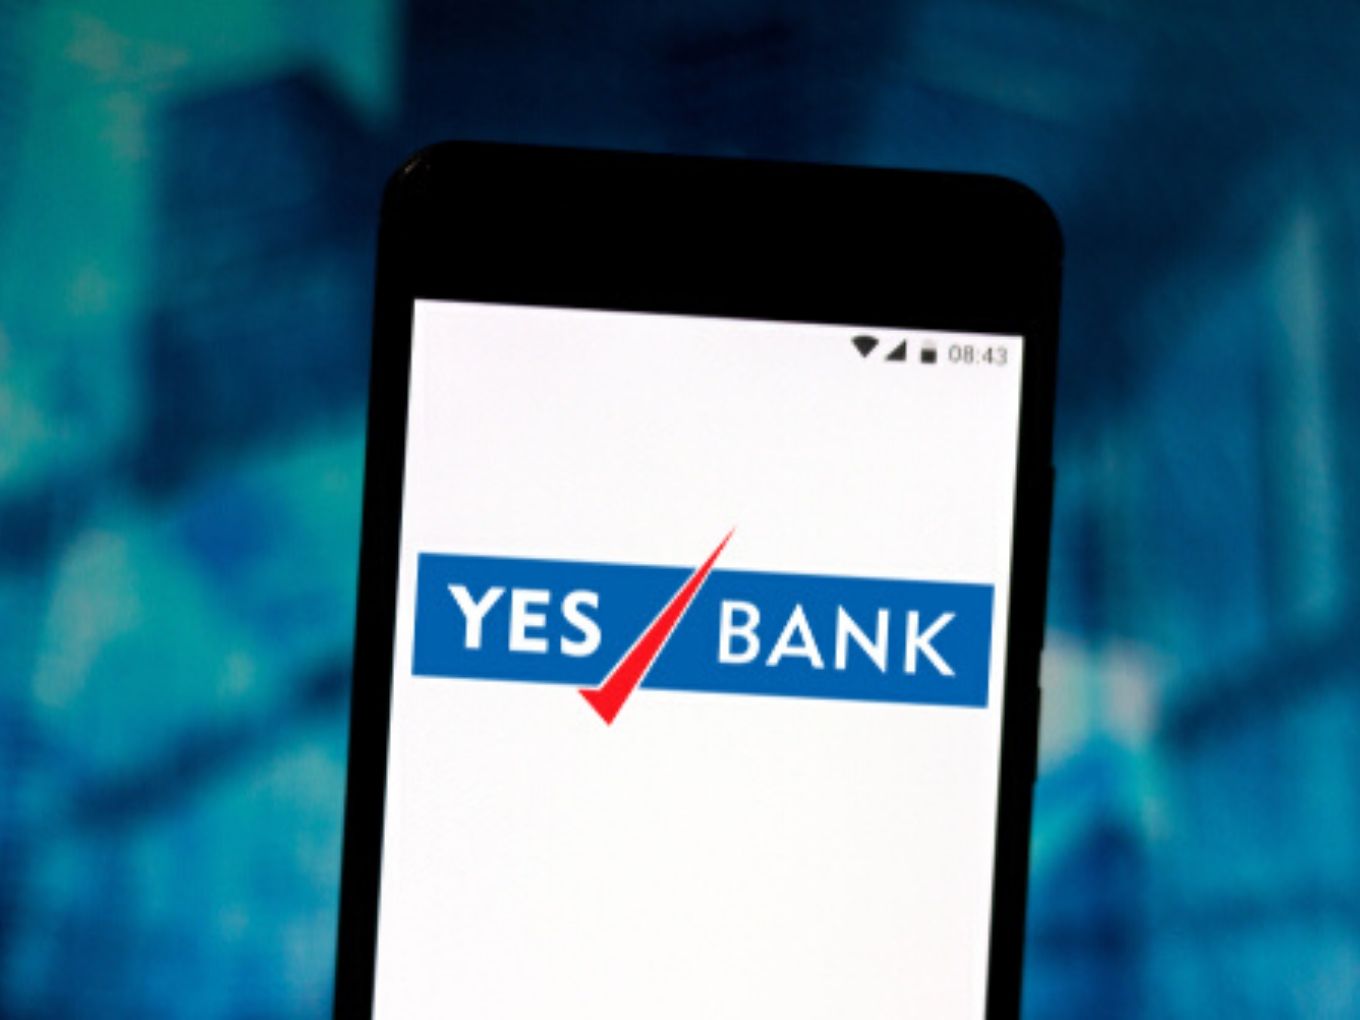 With PhonePe’s Support, Yes Bank Leads UPI Transactions In India